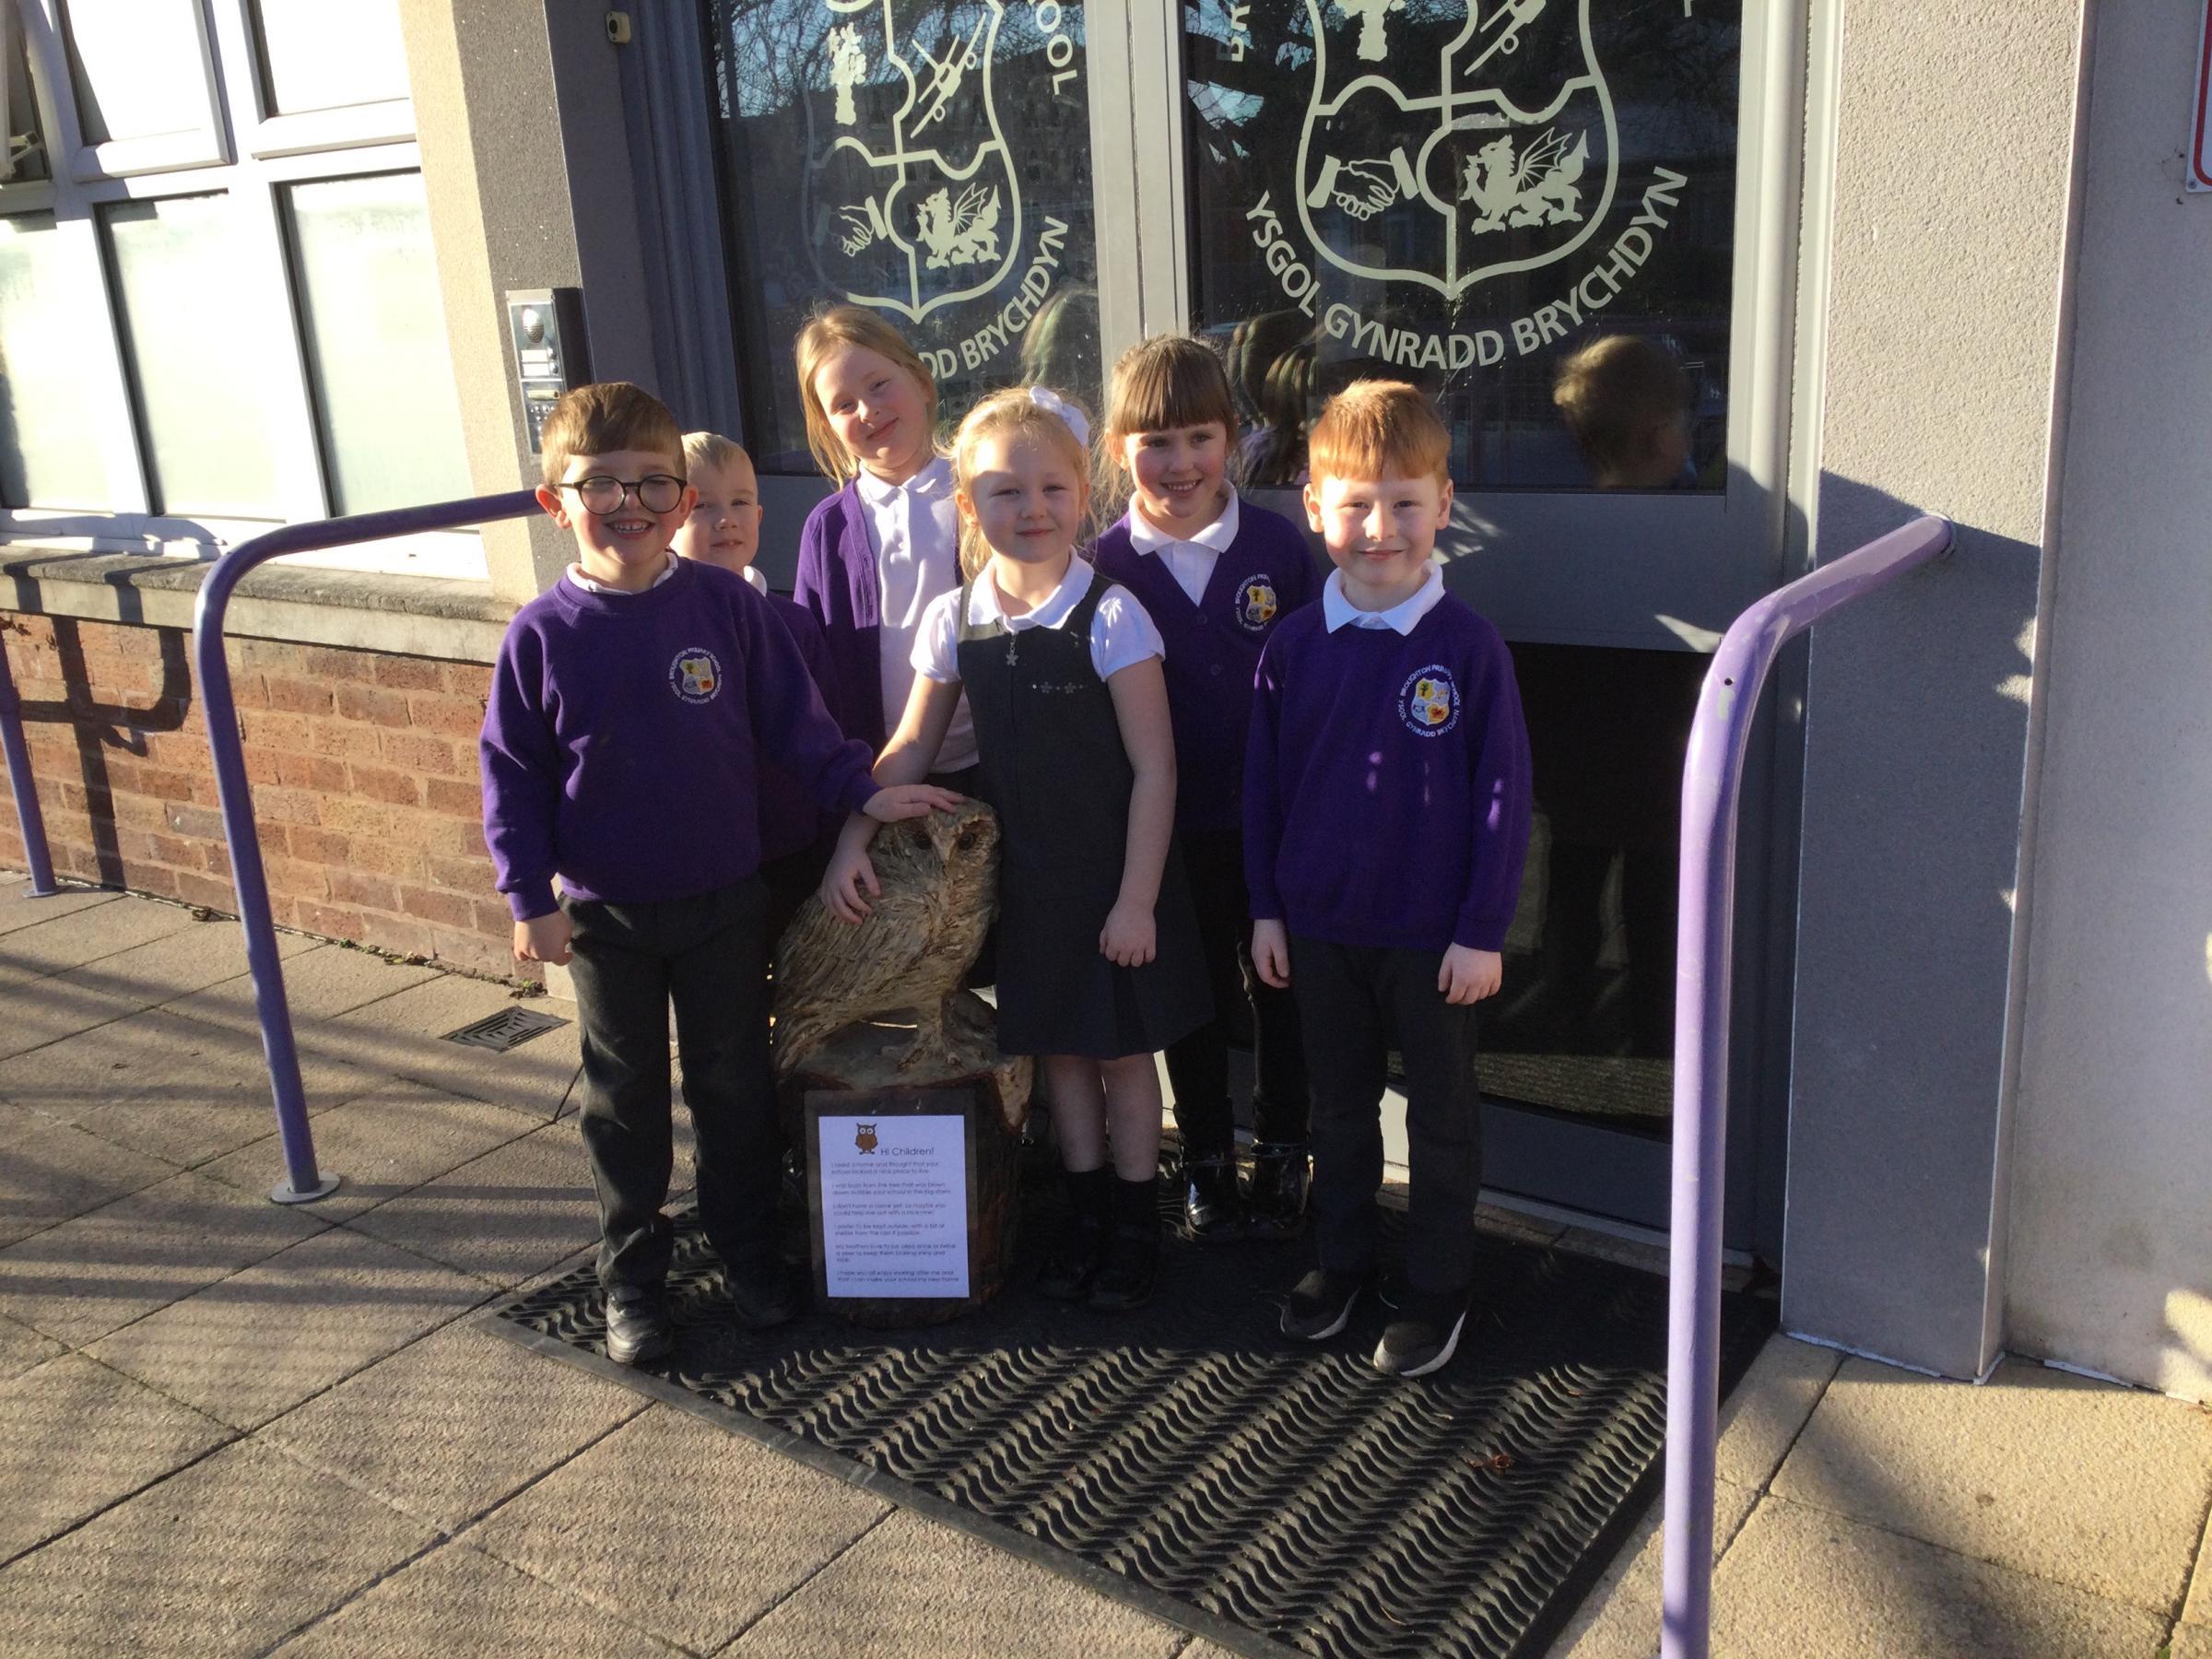 Pupils at Broughton Primary School with their owl carving, gifted by a mystery donor.